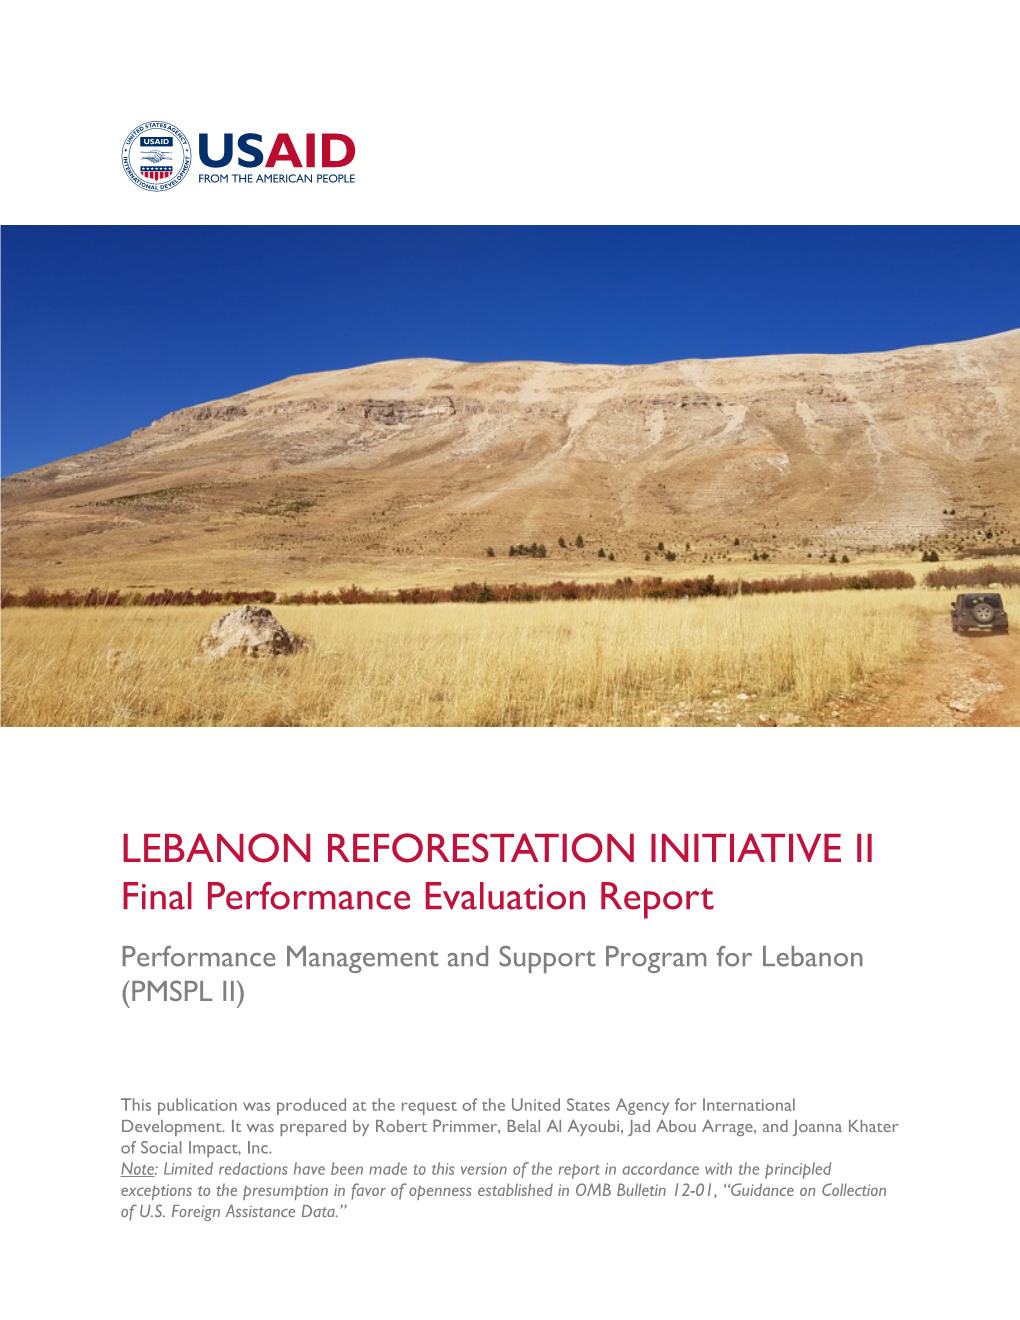 LEBANON REFORESTATION INITIATIVE II Final Performance Evaluation Report Performance Management and Support Program for Lebanon (PMSPL II)